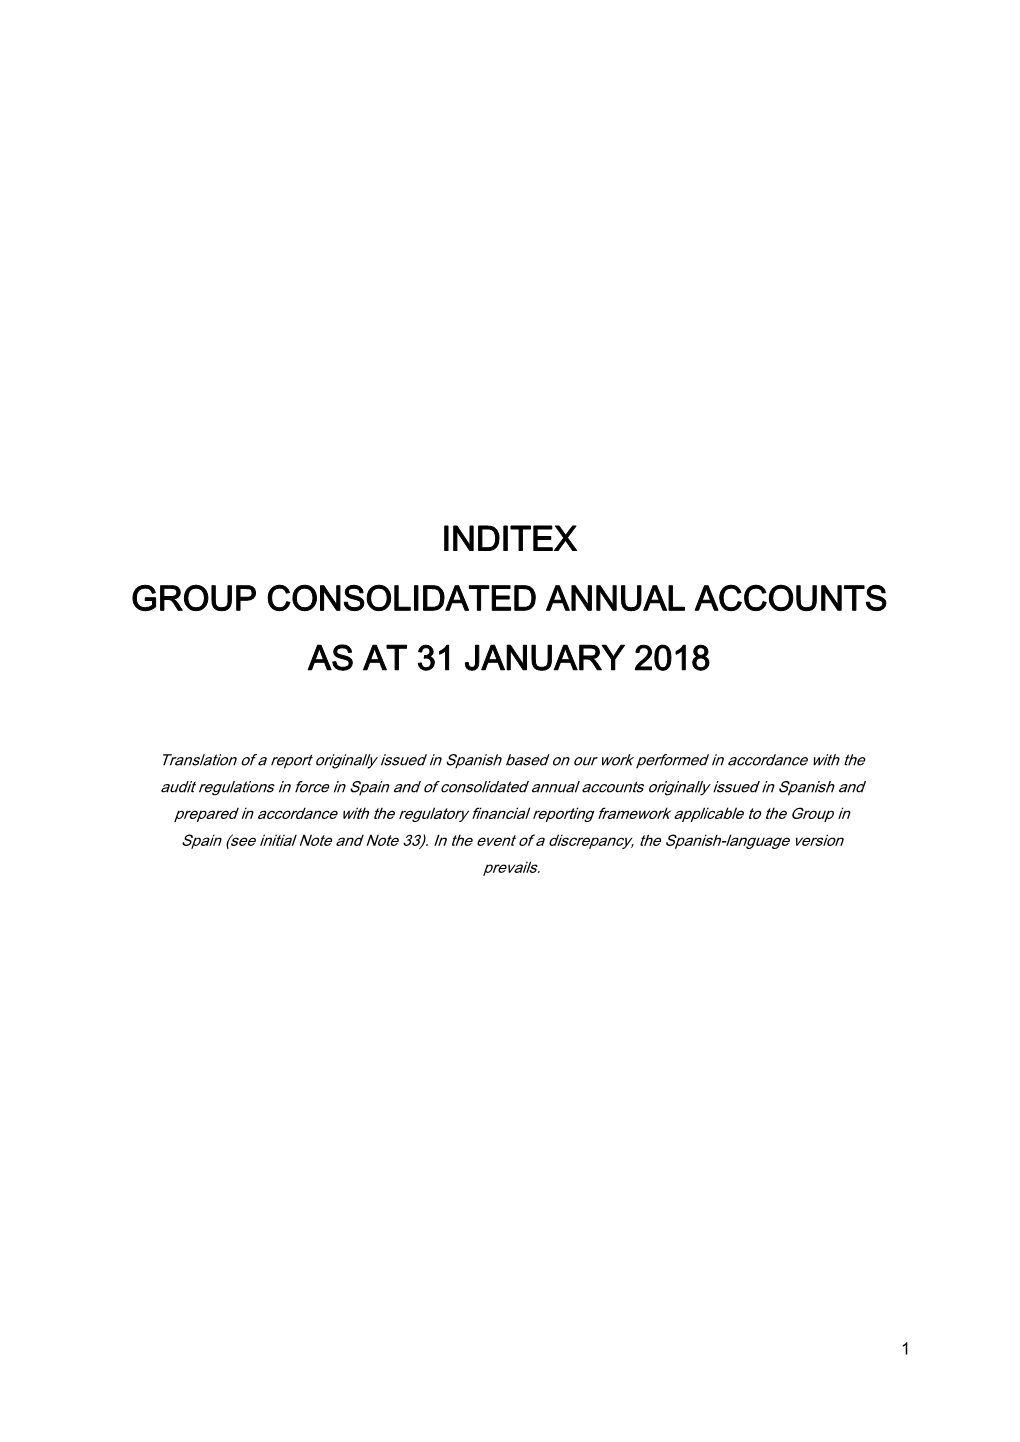 Inditex Group Consolidated Annual Accounts As at 31 January 2018